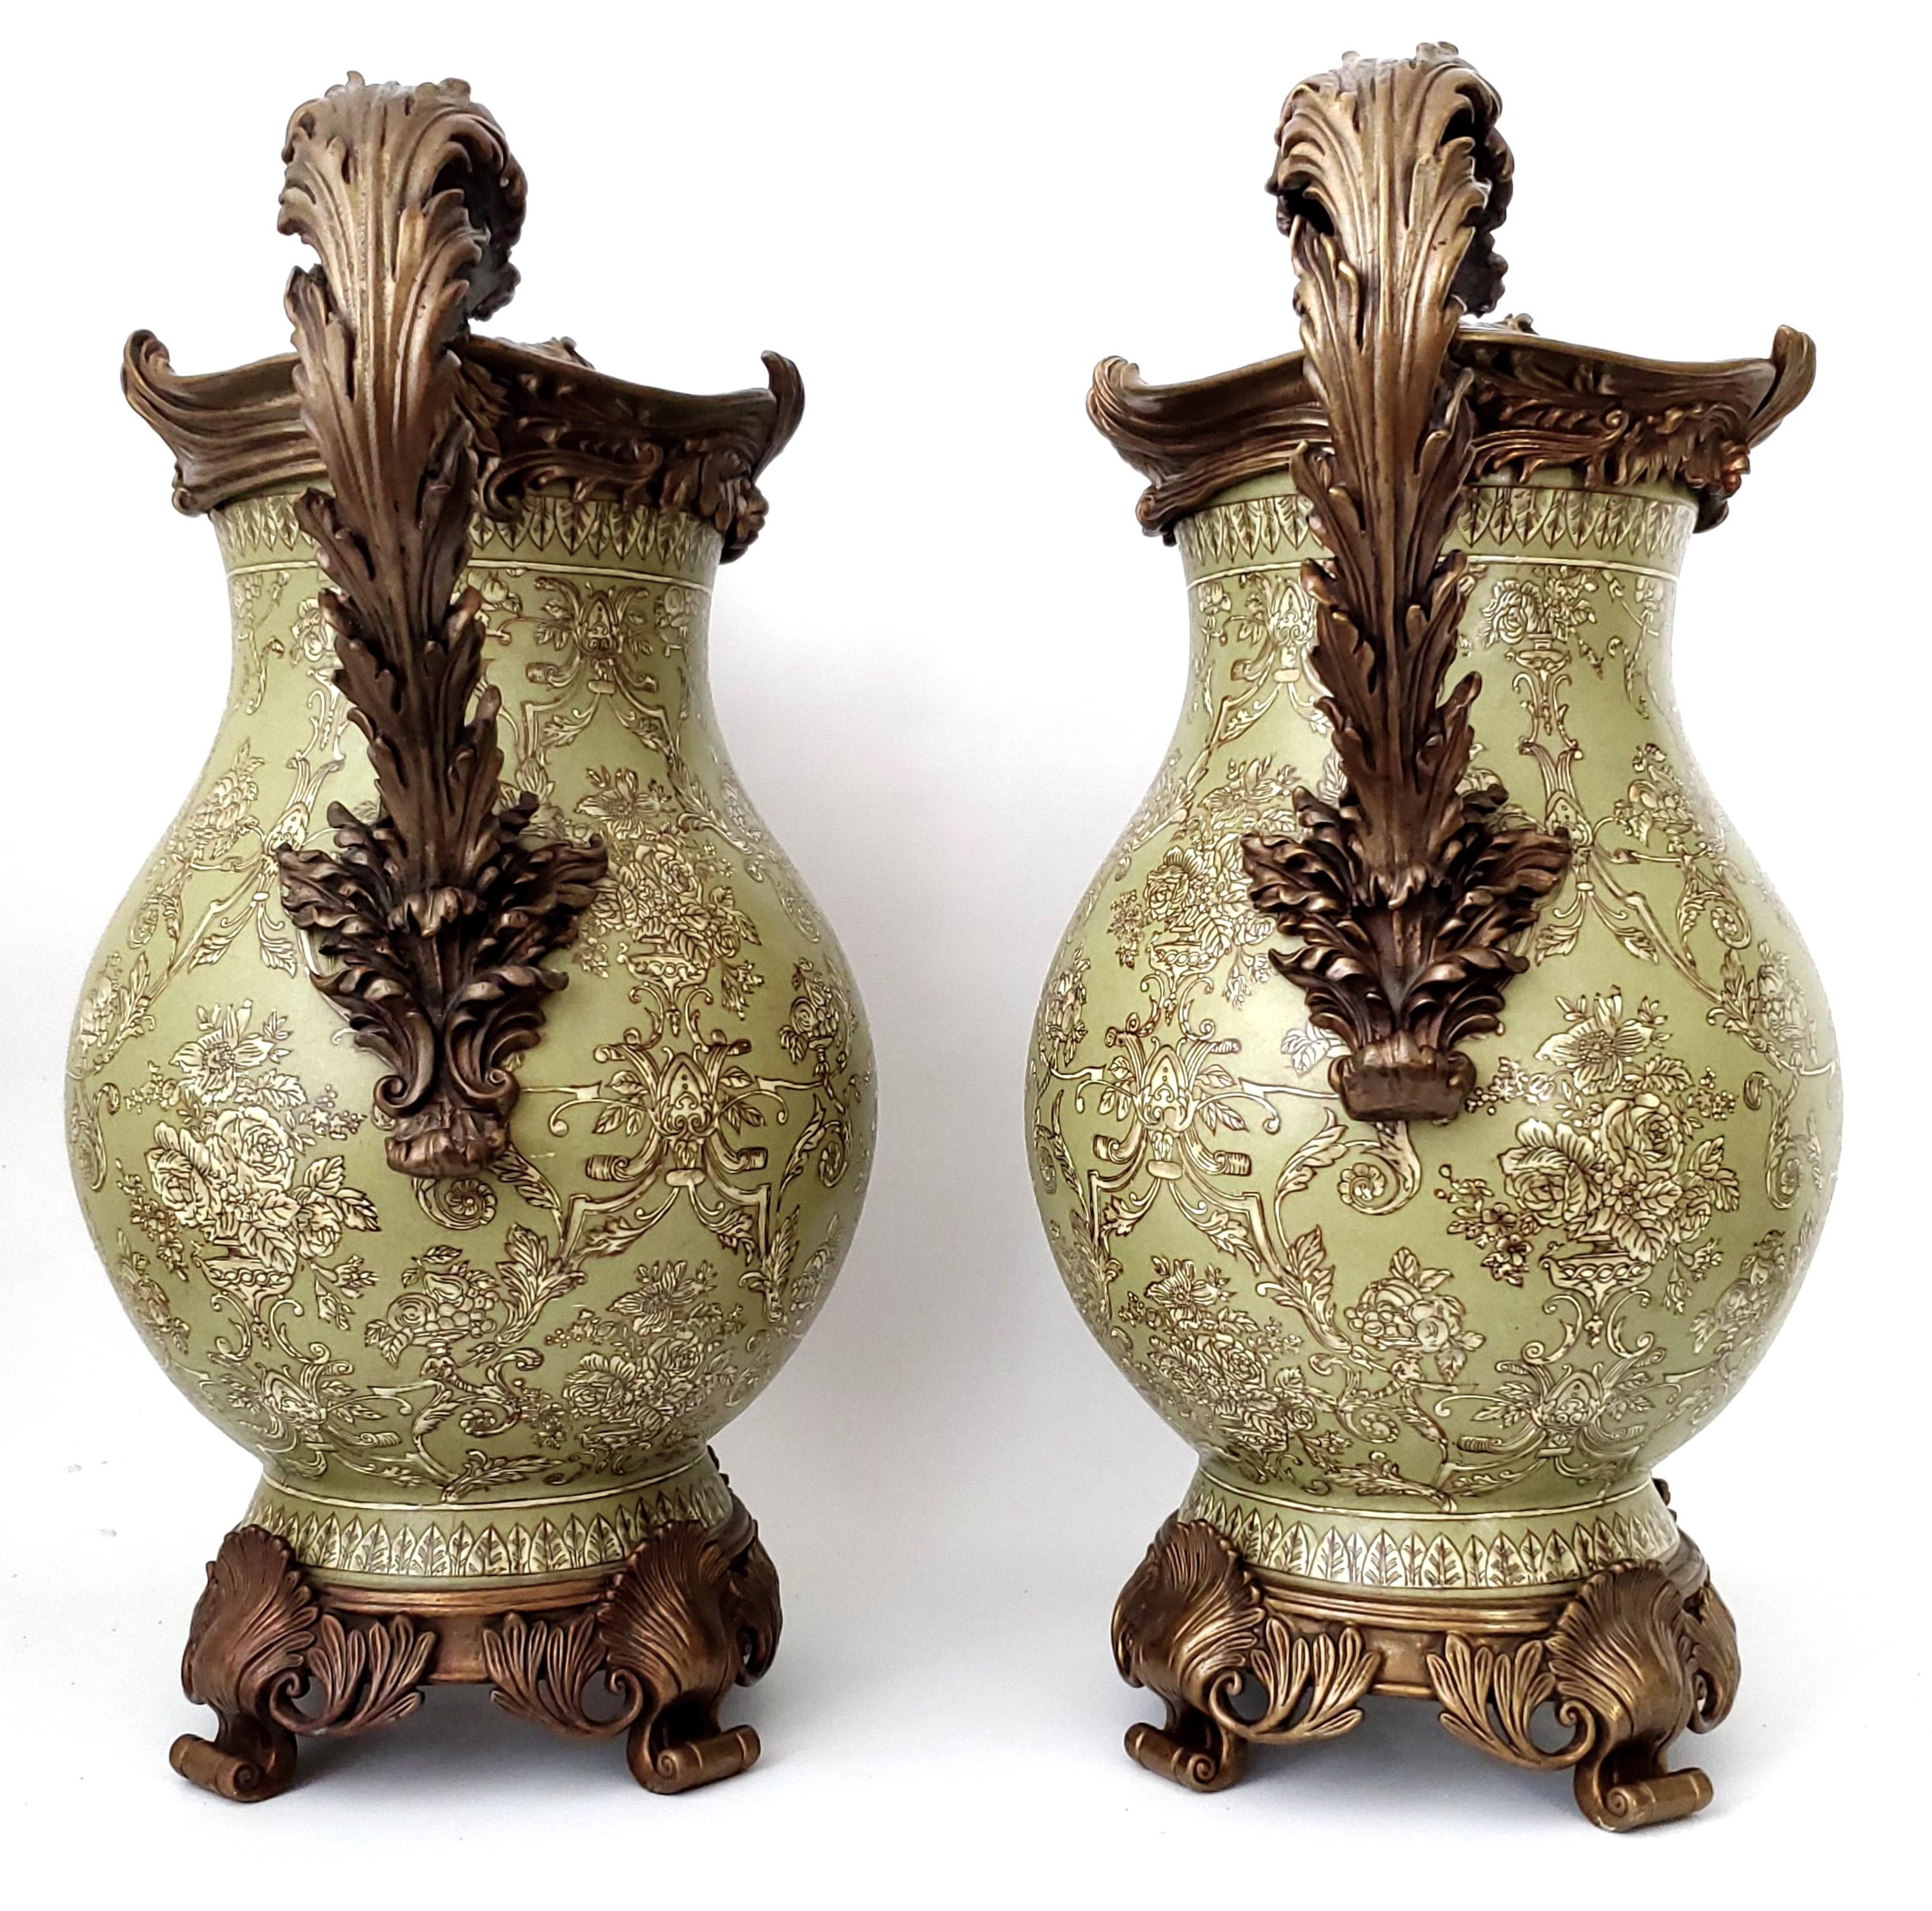 Louis XVI Style Ormolu and Chinese Porcelain Sage Green Urns or Vases - A Pair   In Good Condition For Sale In Miami, FL